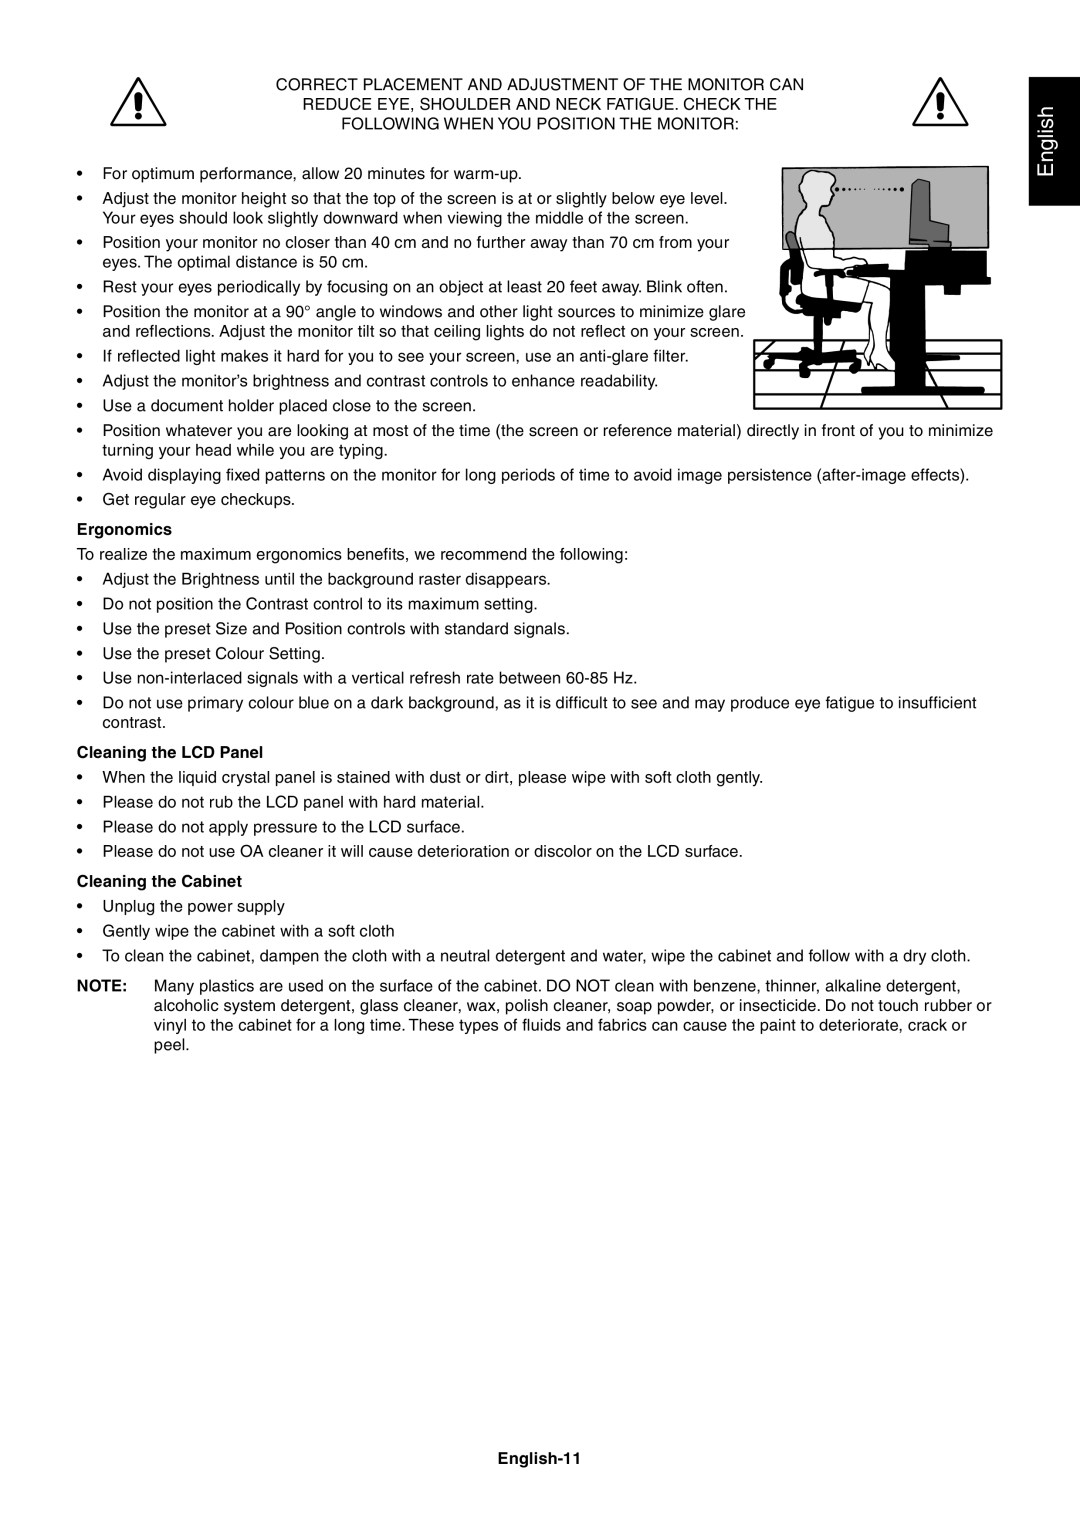 NEC LCD2070NX user manual Ergonomics, Cleaning the LCD Panel, Cleaning the Cabinet, English-11 